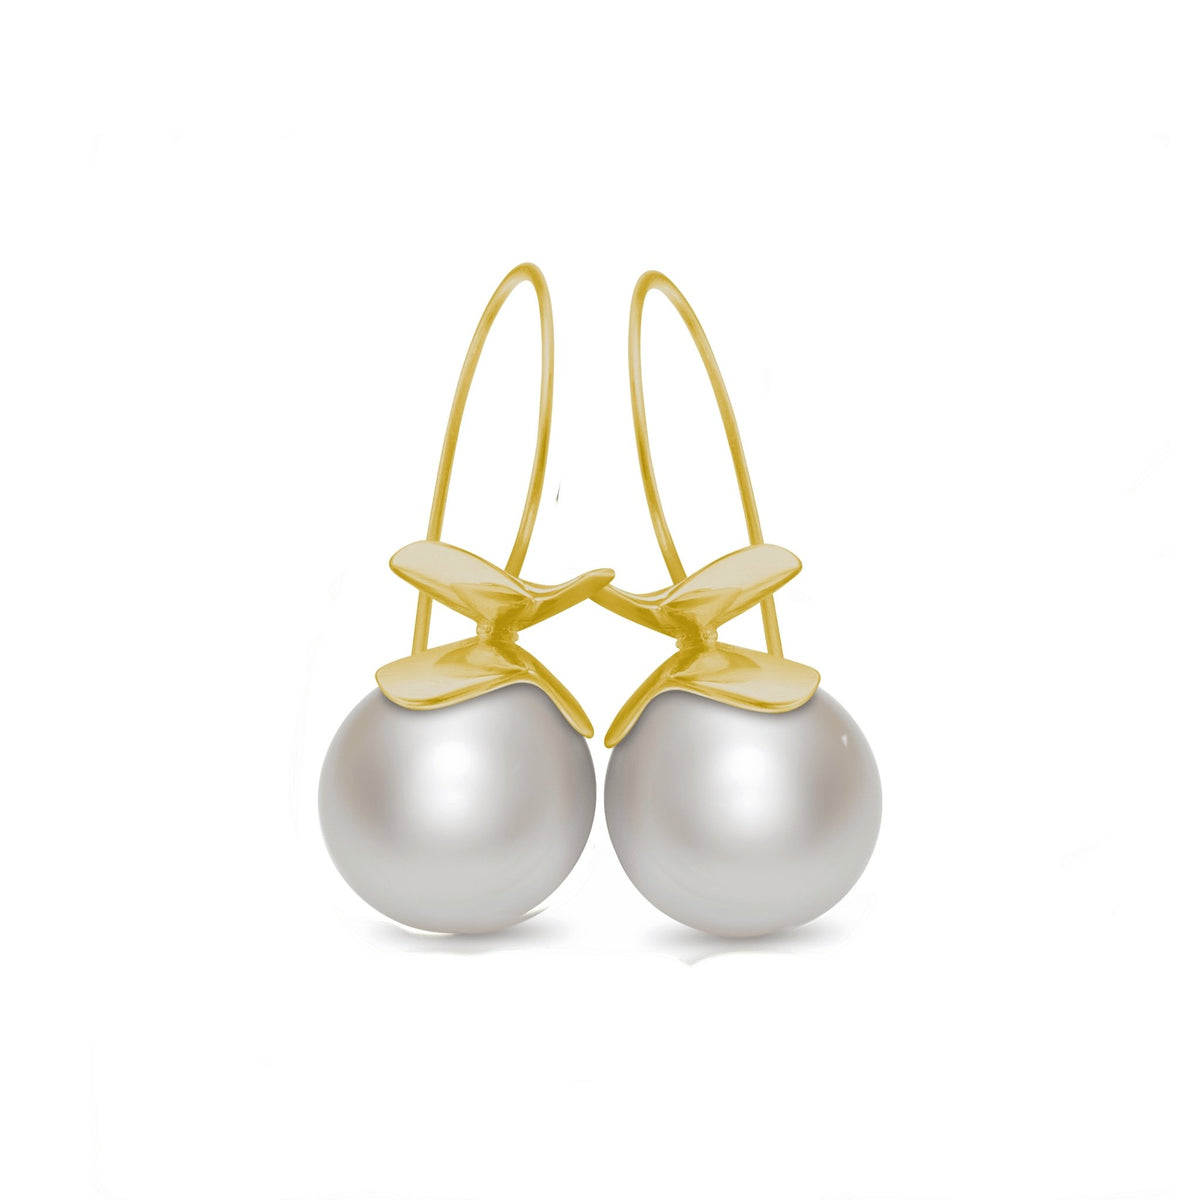 Magnolia South Sea Cultured Pearl Earrings - Ashleigh Branstetter®